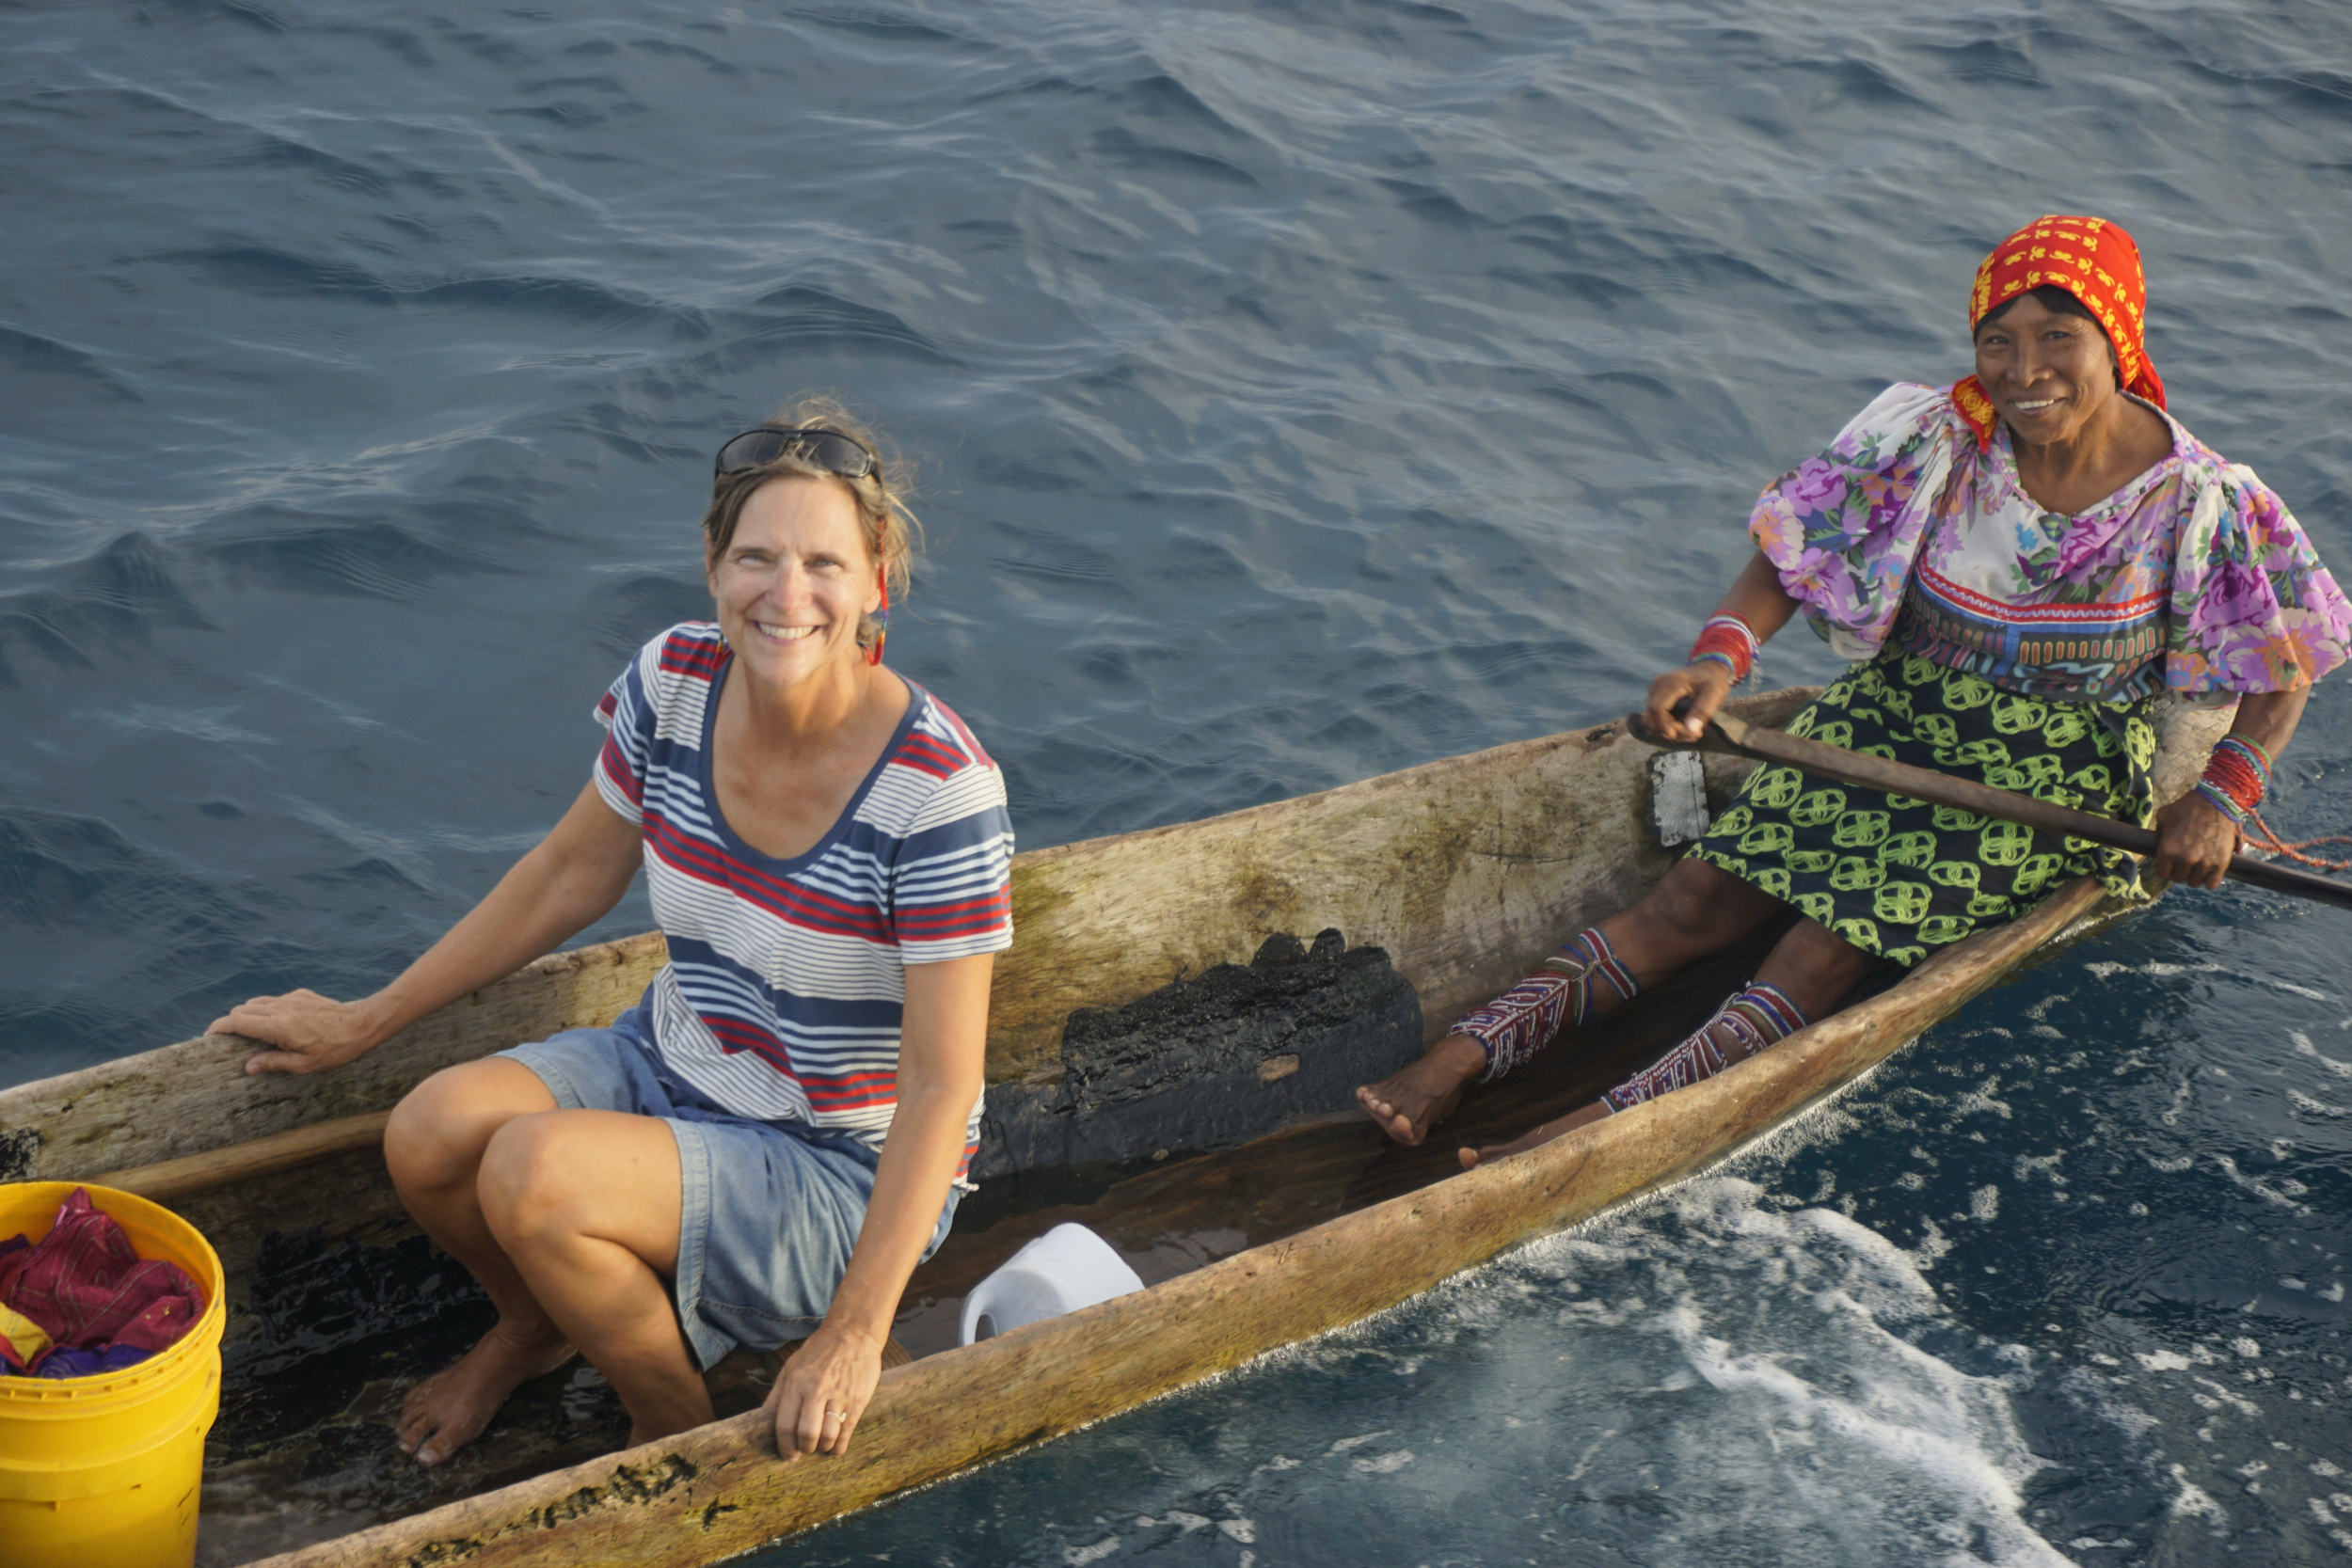 37. Ride in a dugout canoe, the woman row